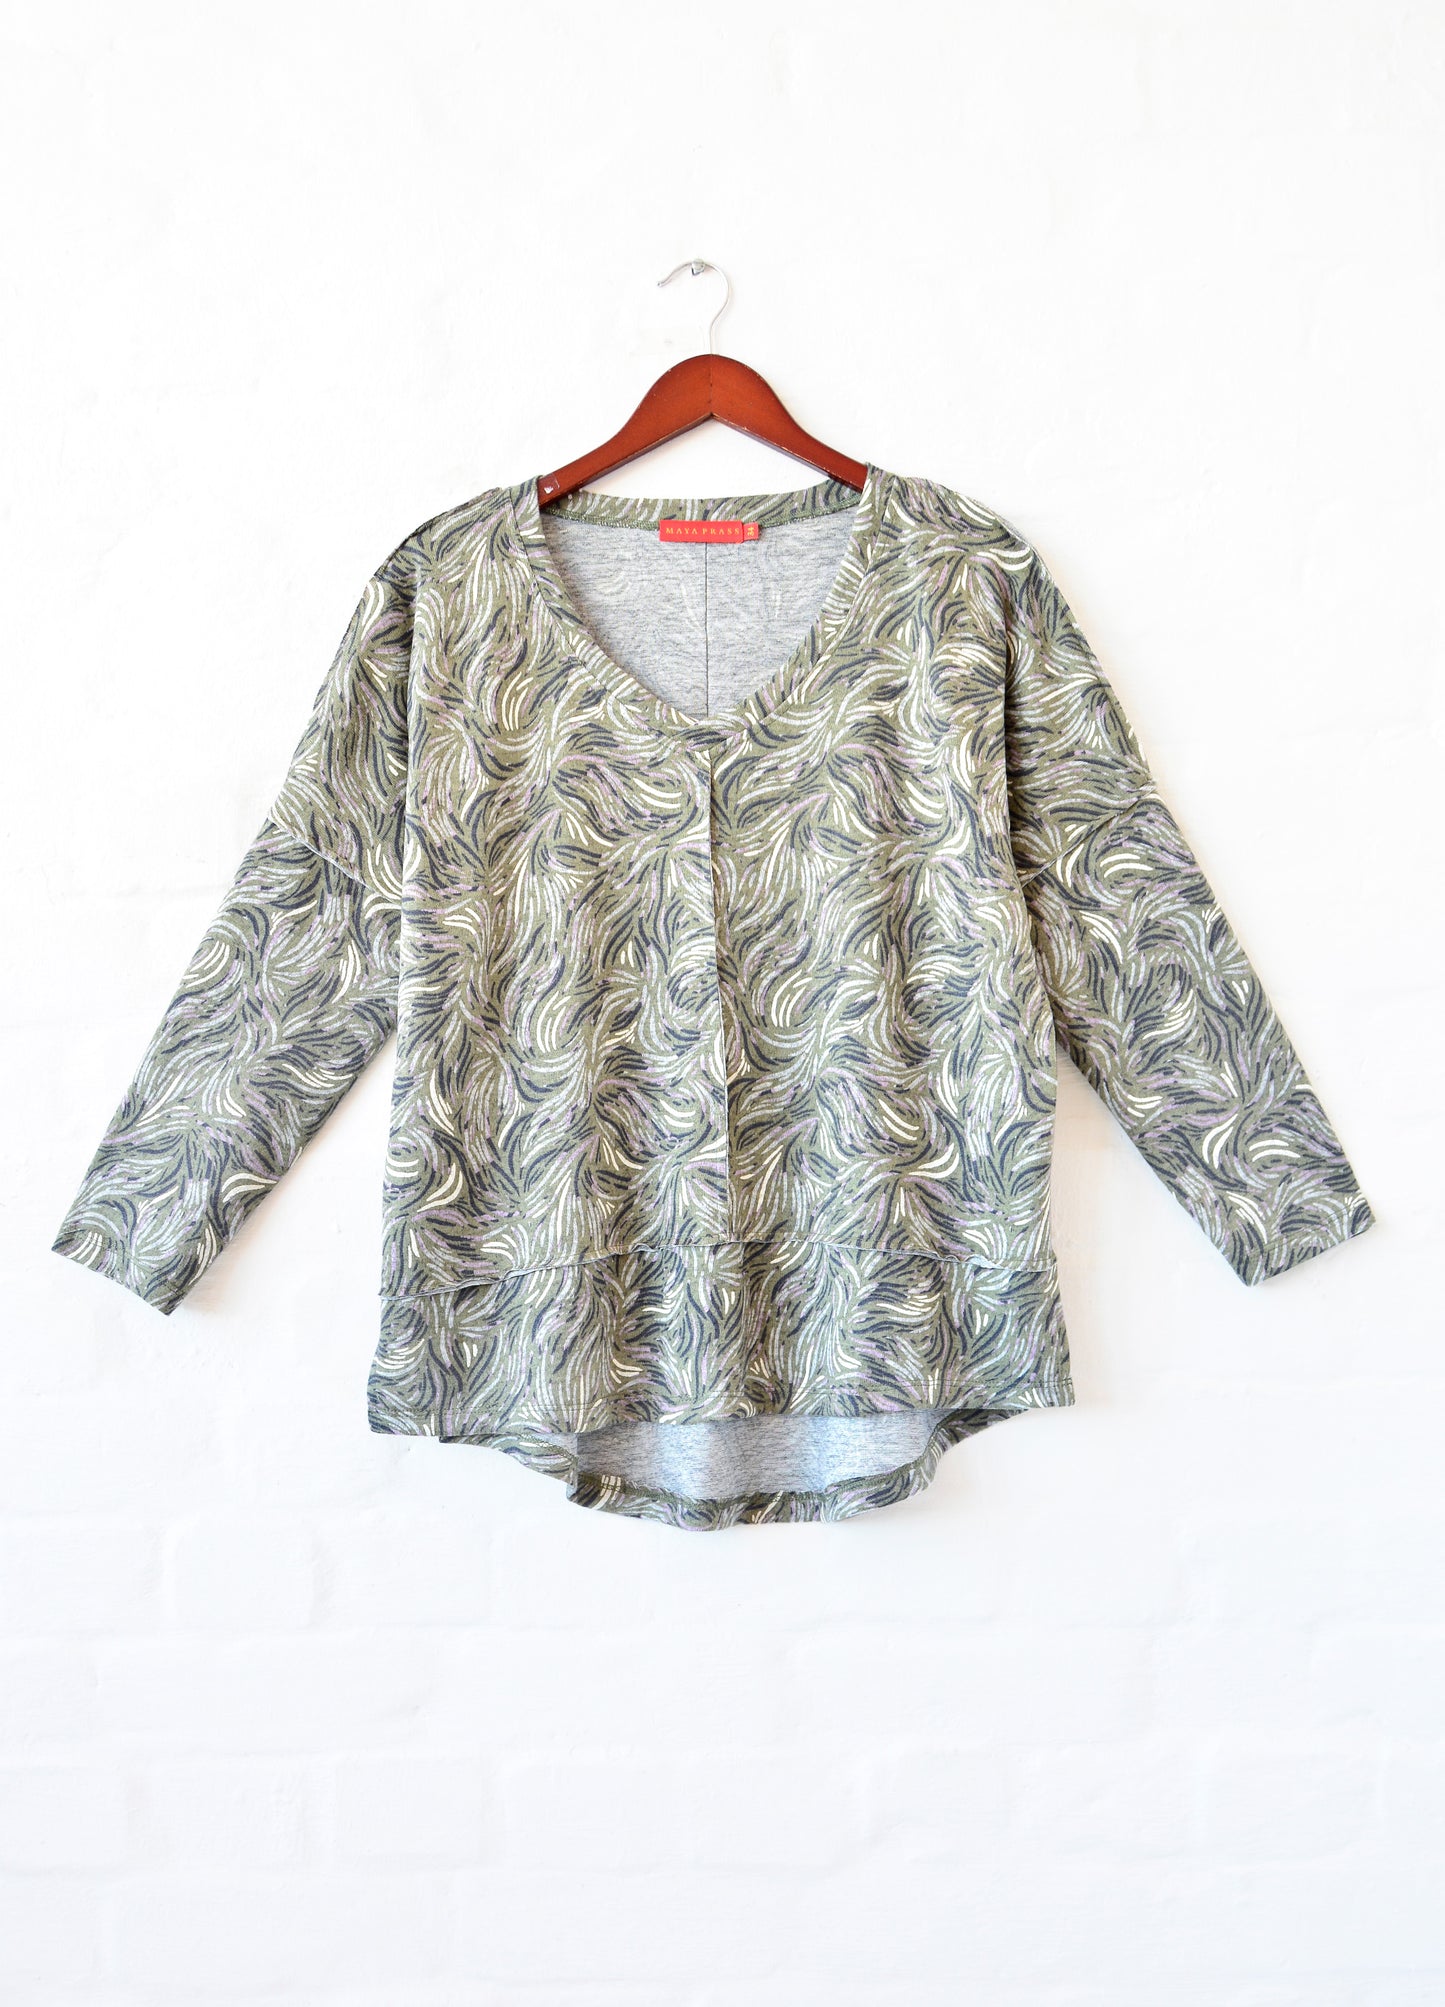 Roma Pullover in olive Huckleberry print